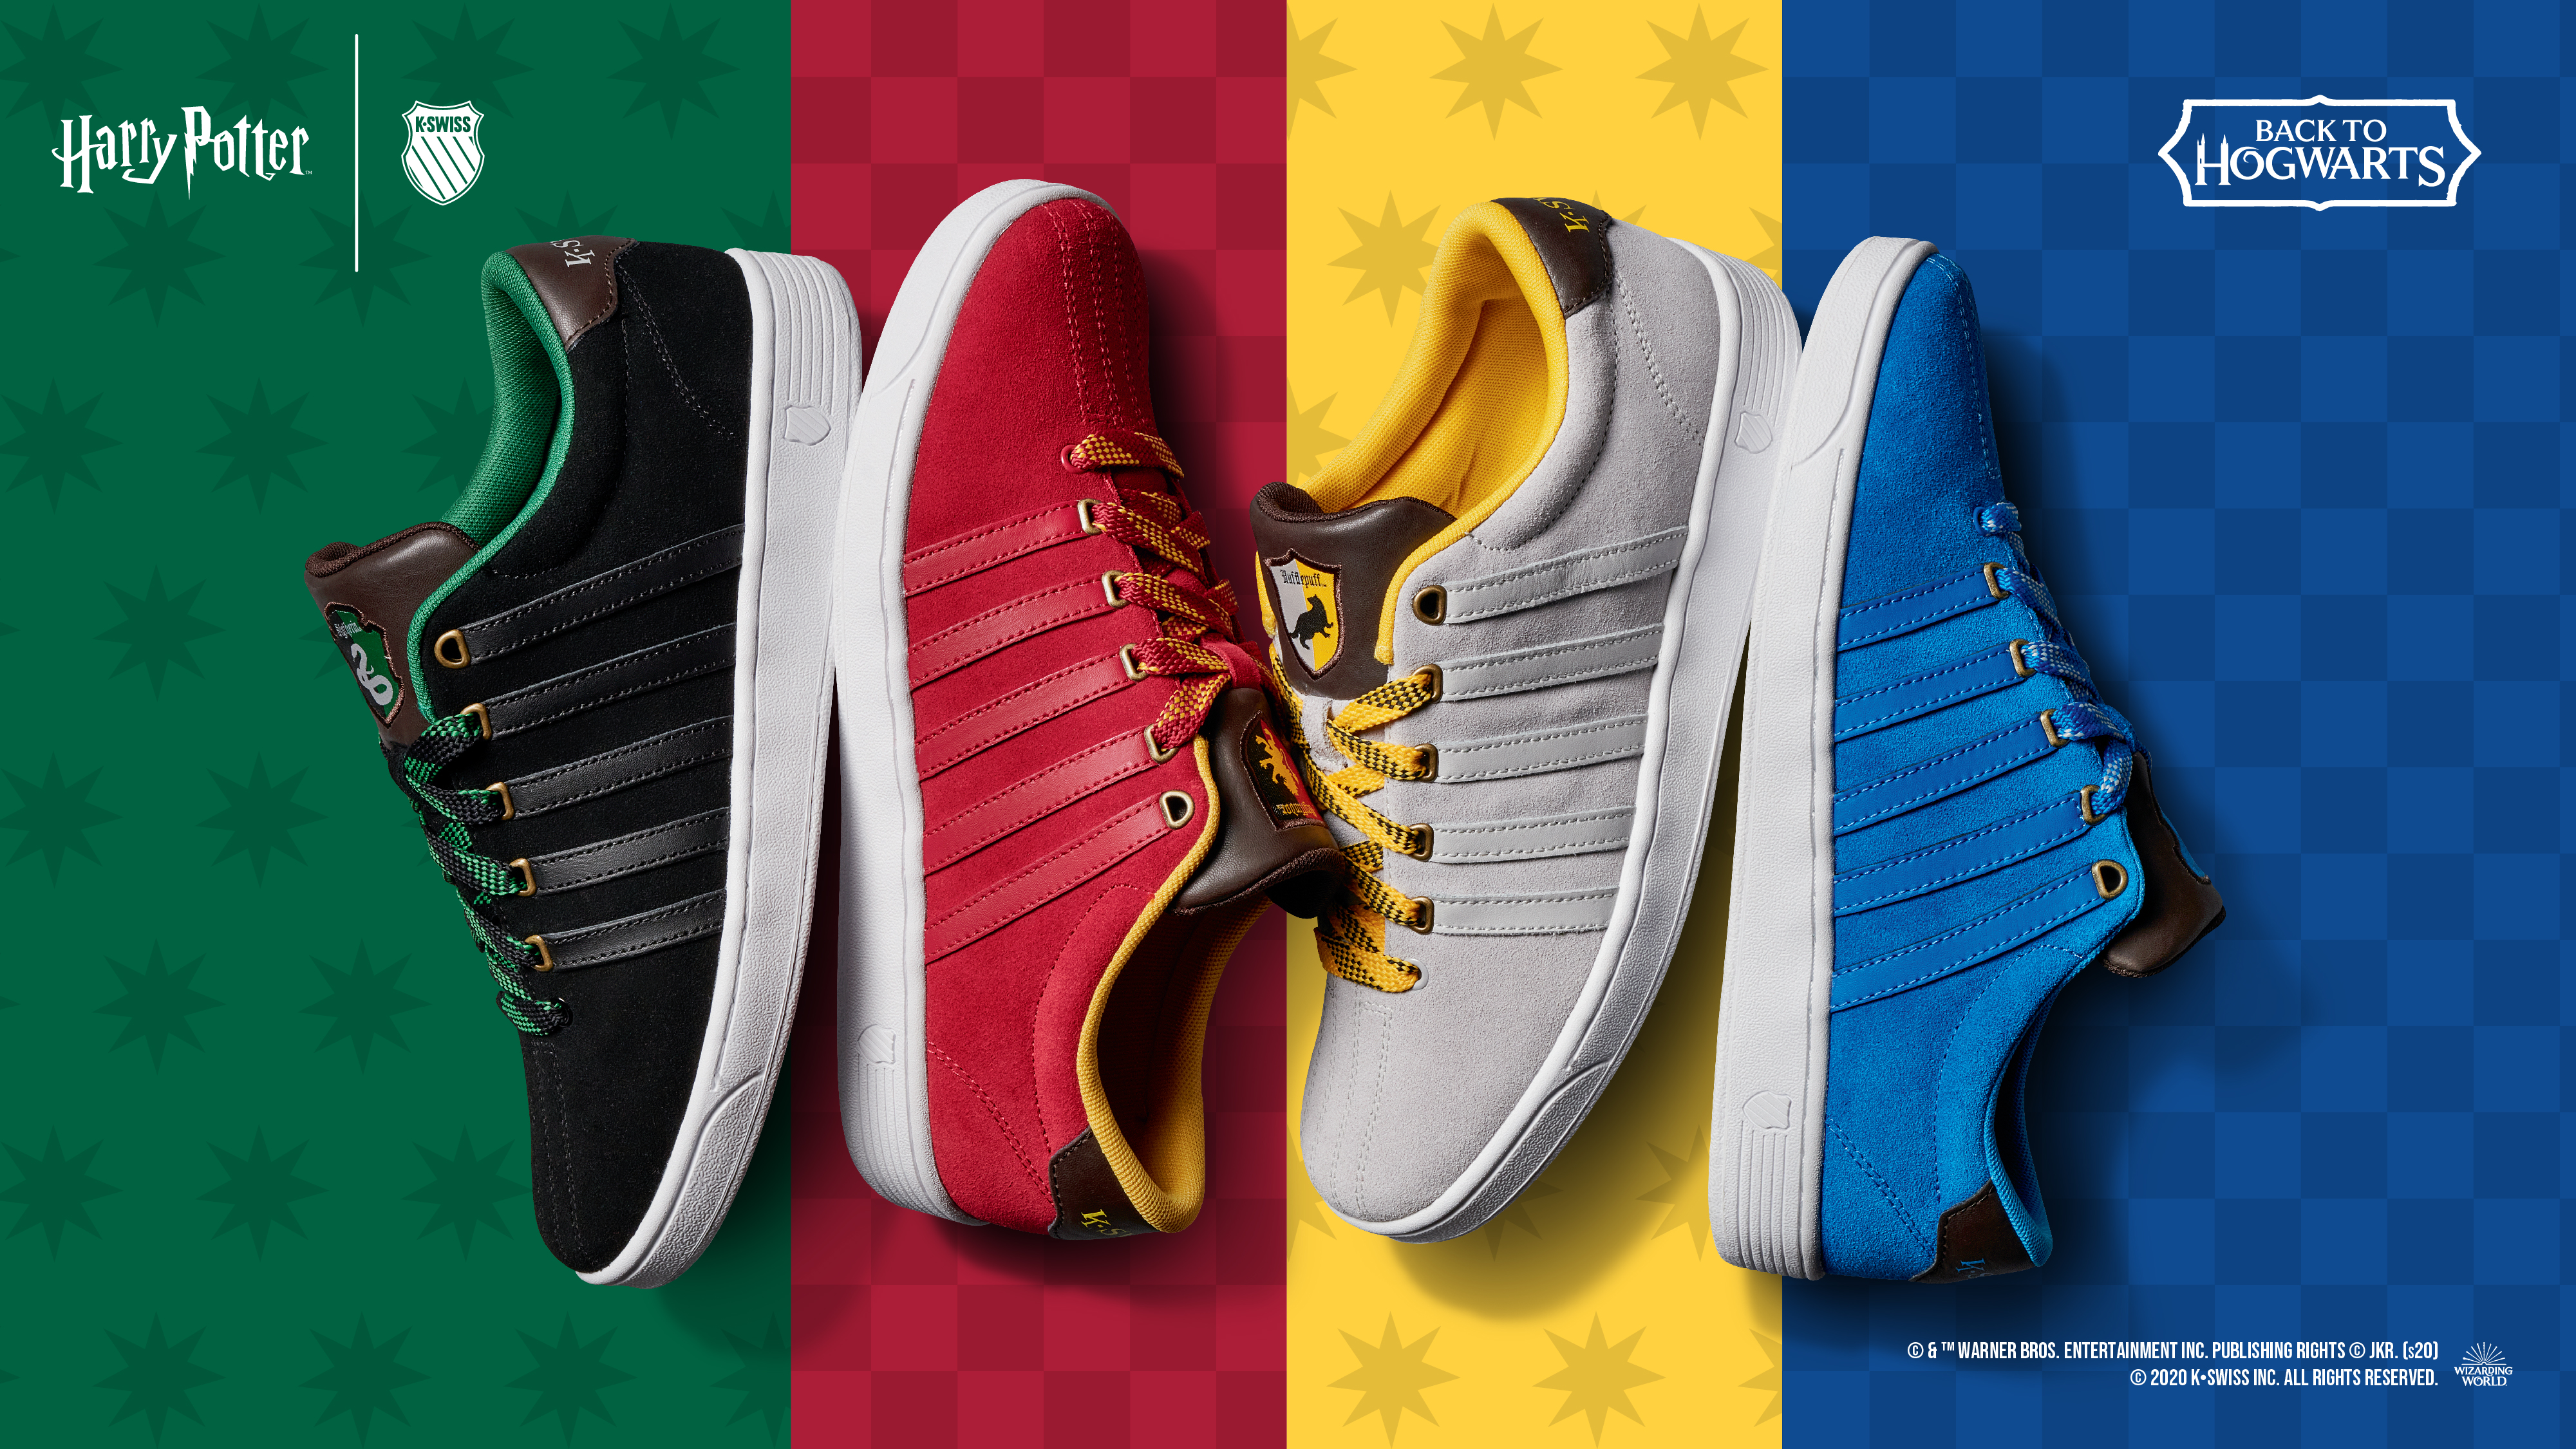 The new Harry Potter x K-Swiss shoes 